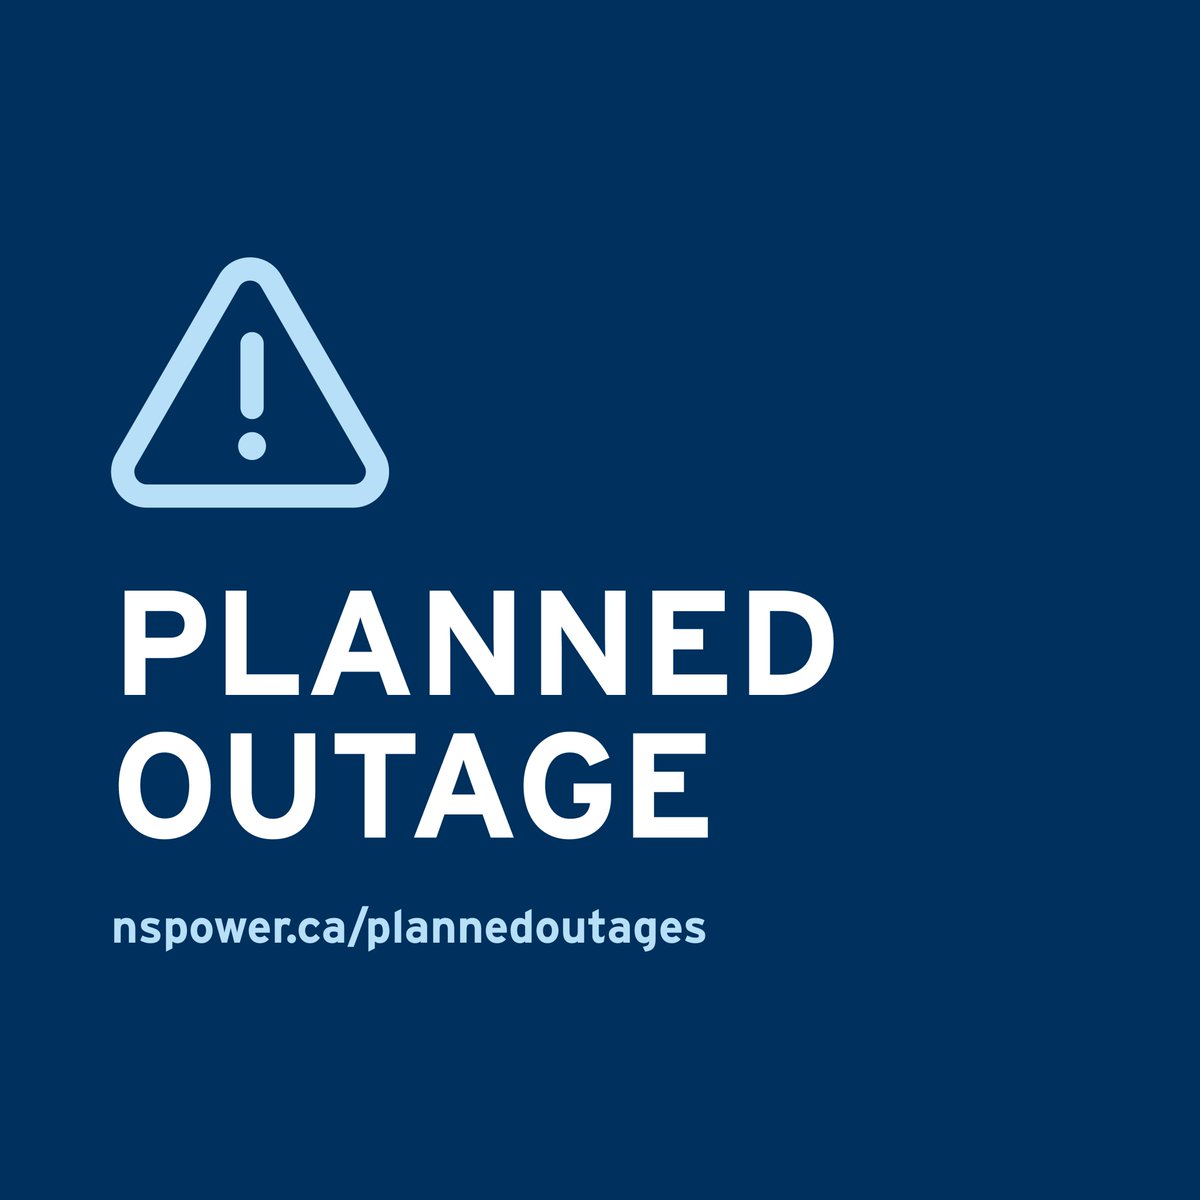 A planned outage will affect customers in #BlackPoint, #Hubbards, #Chester, and surrounding areas on Sunday, April 21 between 2–6 AM. More information and a map of impacted customers can be found here: nspower.ca/plannedoutages.